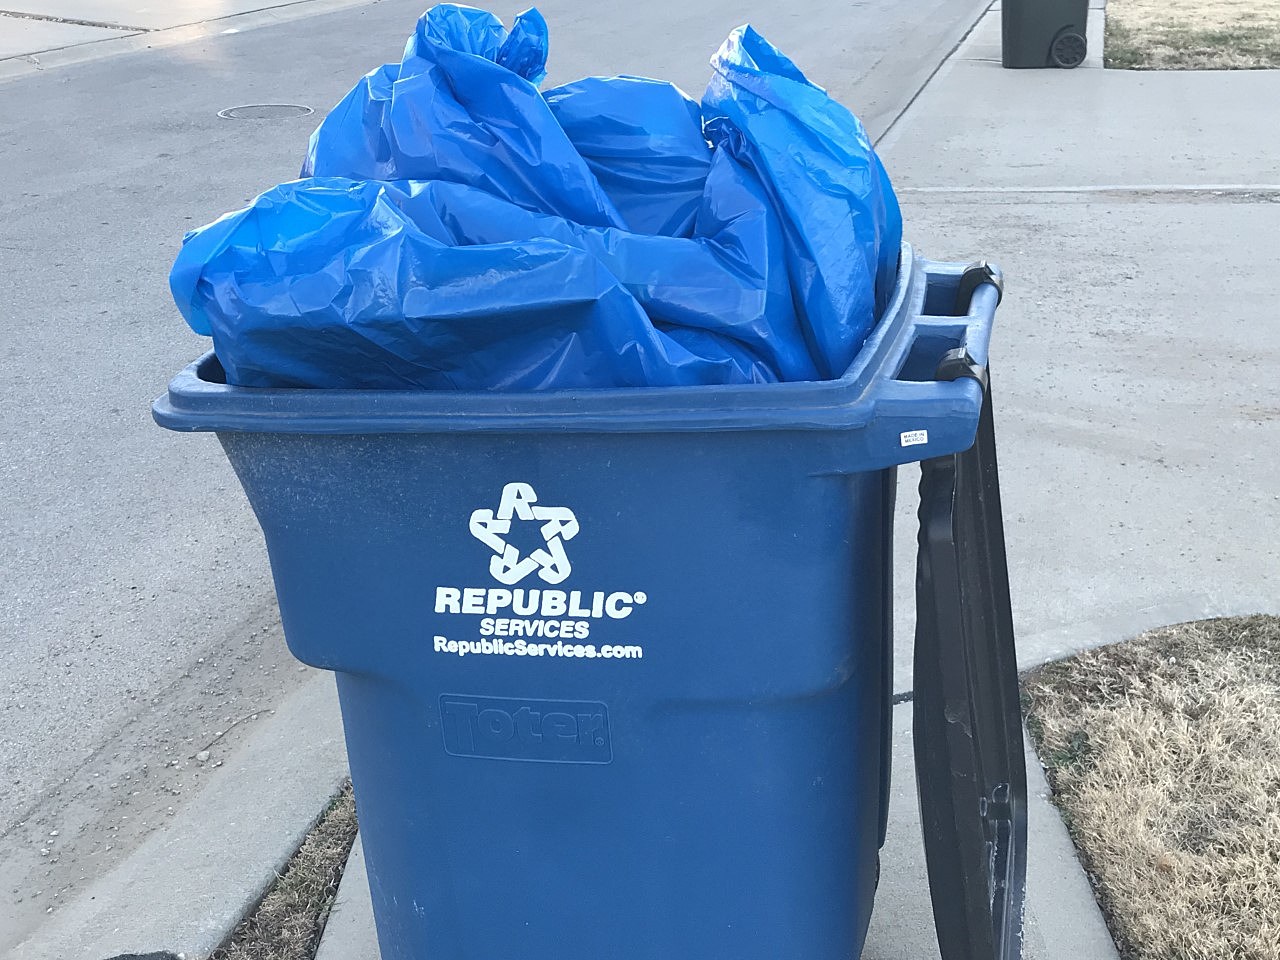 I'm Sick of Republic's Inability to Pick Up Warrensburg's Garbage